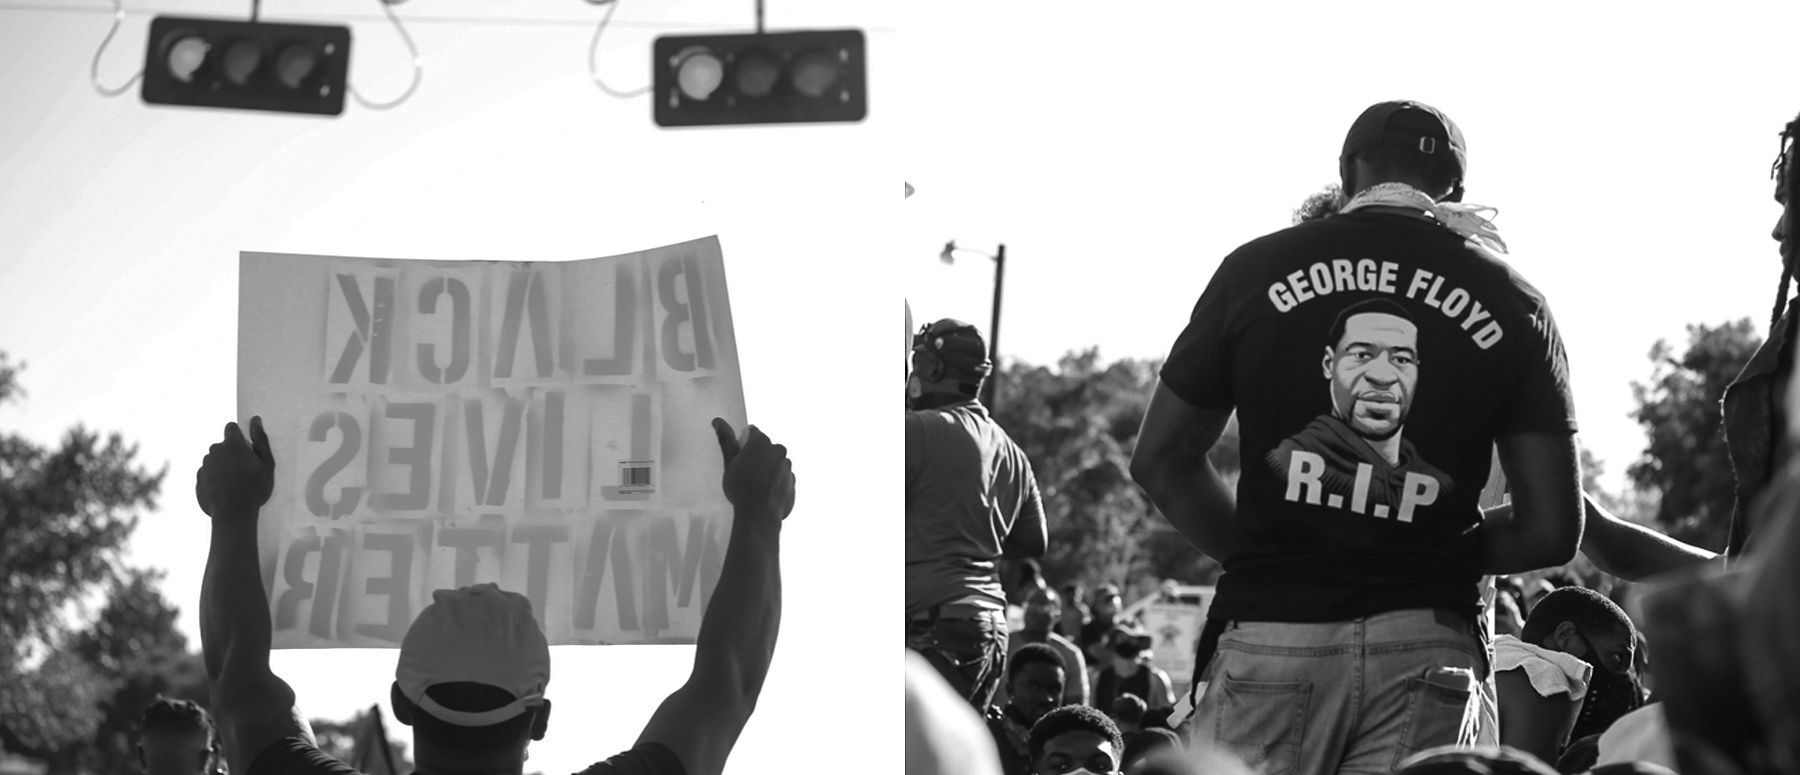 Black Lives Matter Sign And Person With RIP George Floyd T-Shirt